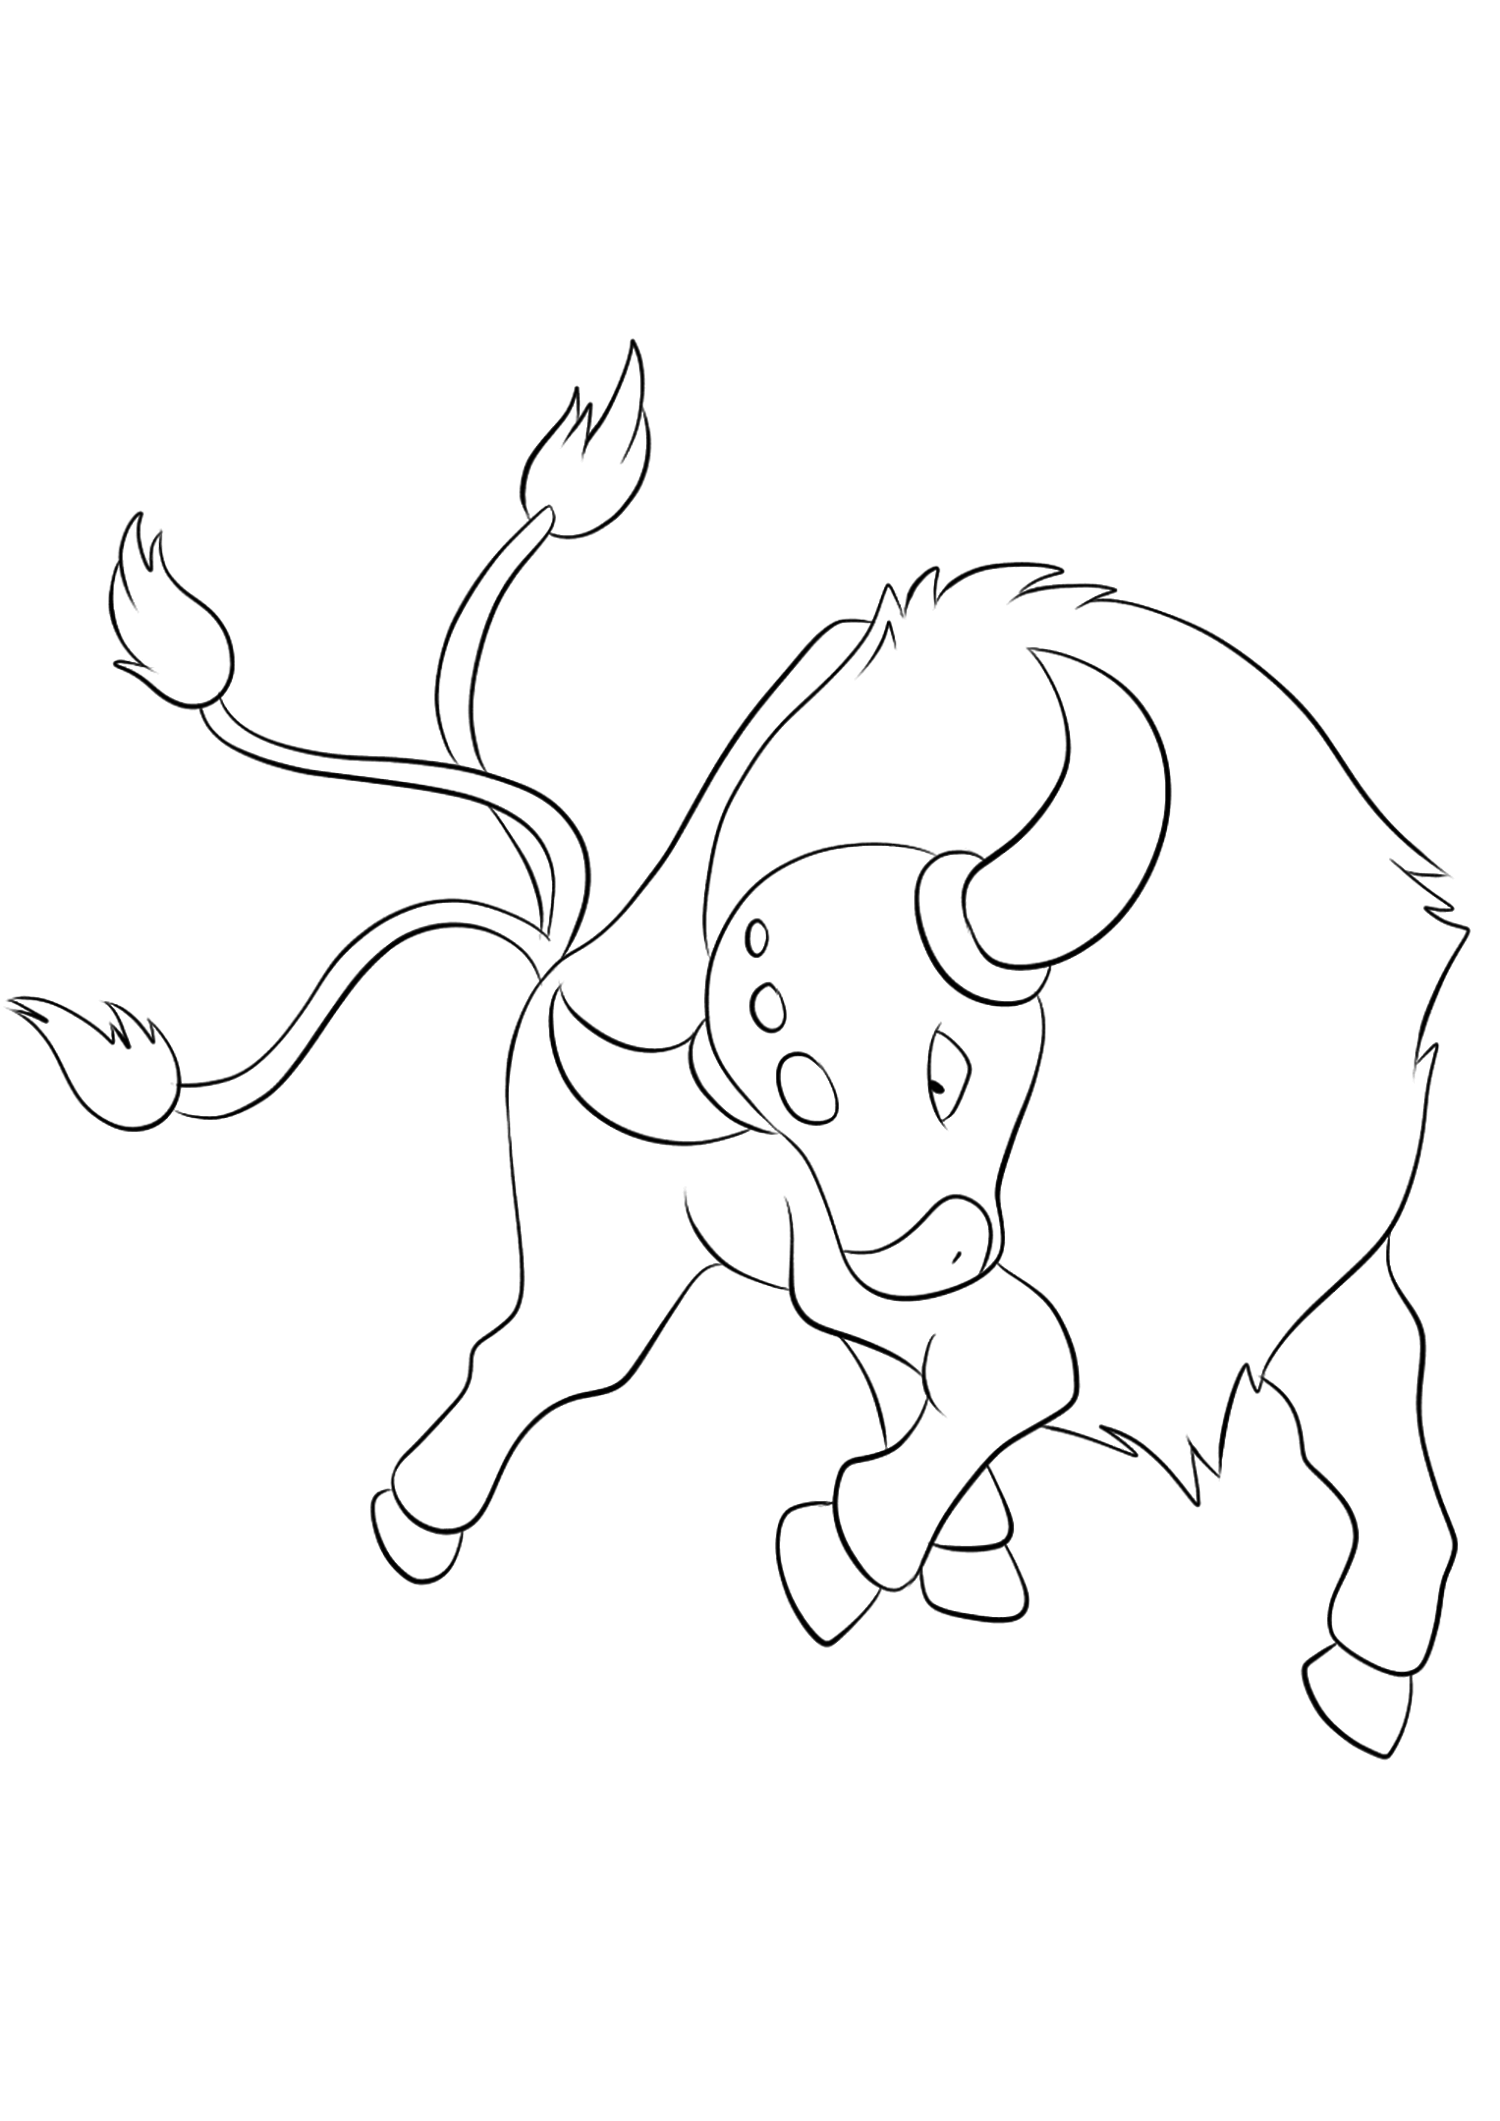 Tauros (No.128). Tauros Coloring page, Generation I Pokemon of type NormalOriginal image credit: Pokemon linearts by Lilly Gerbil on Deviantart.Permission:  All rights reserved © Pokemon company and Ken Sugimori.